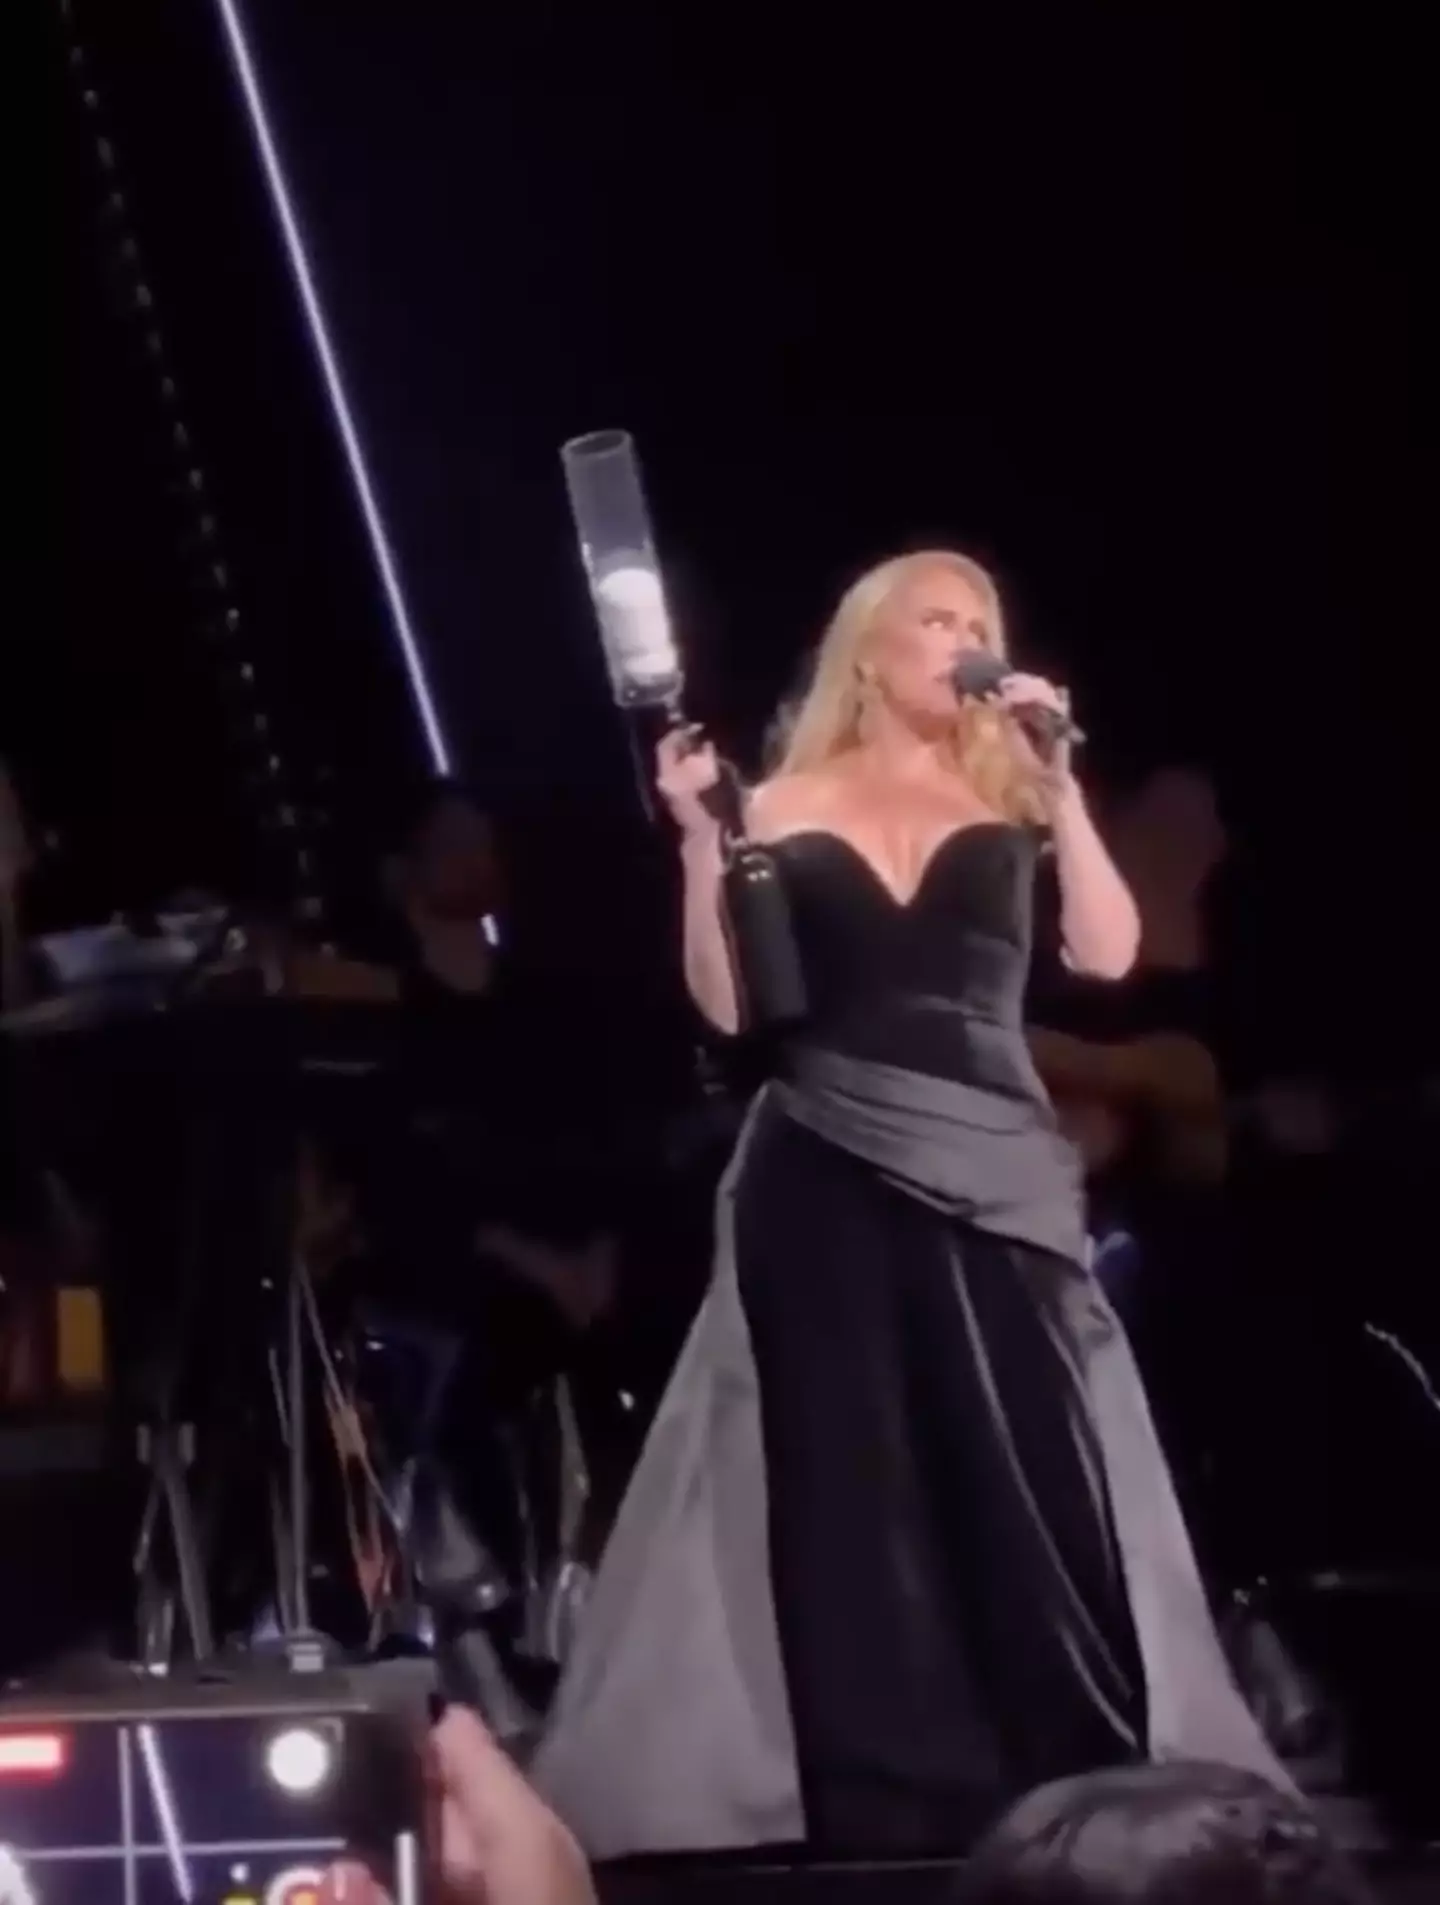 Adele was performing in Vegas when she got her t-shirt cannon out. Instagram/@mikesnedegar